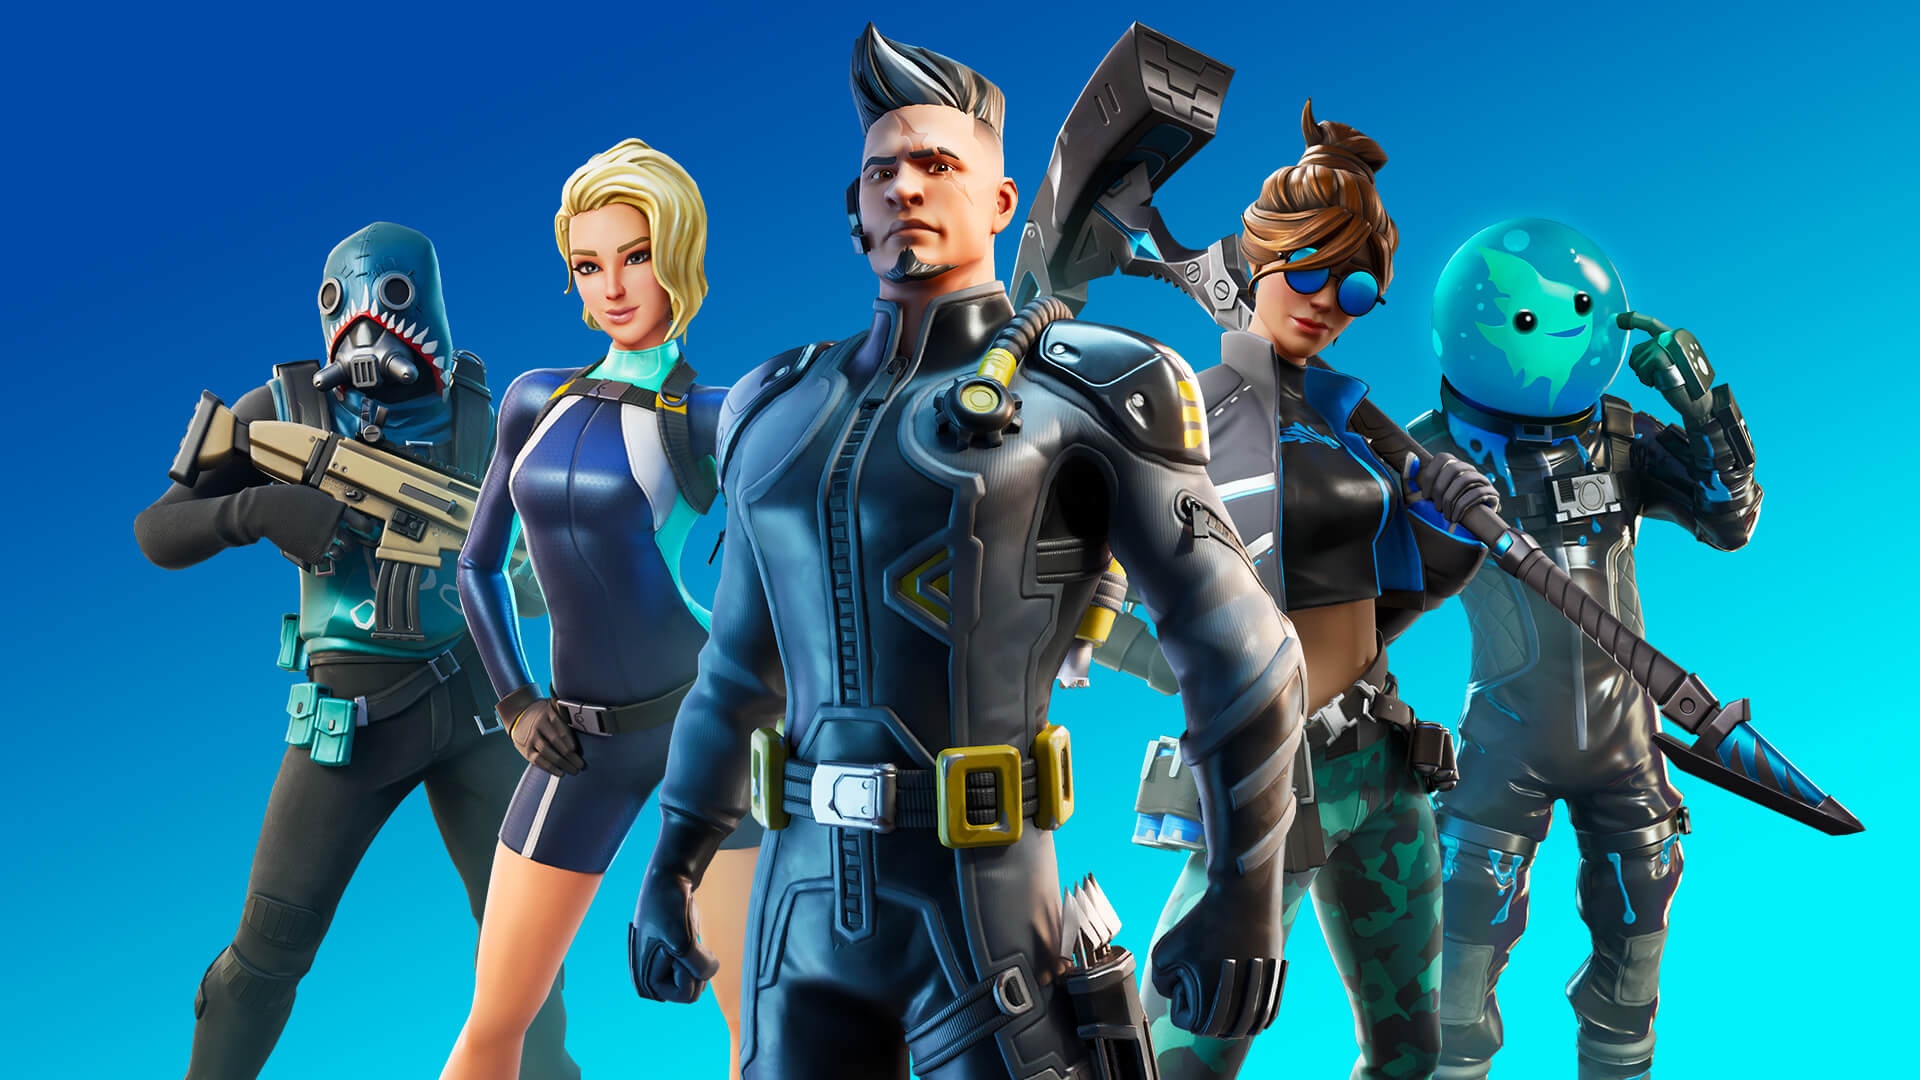 Addictive games - Fornite. An image shows a group of characters from the game.